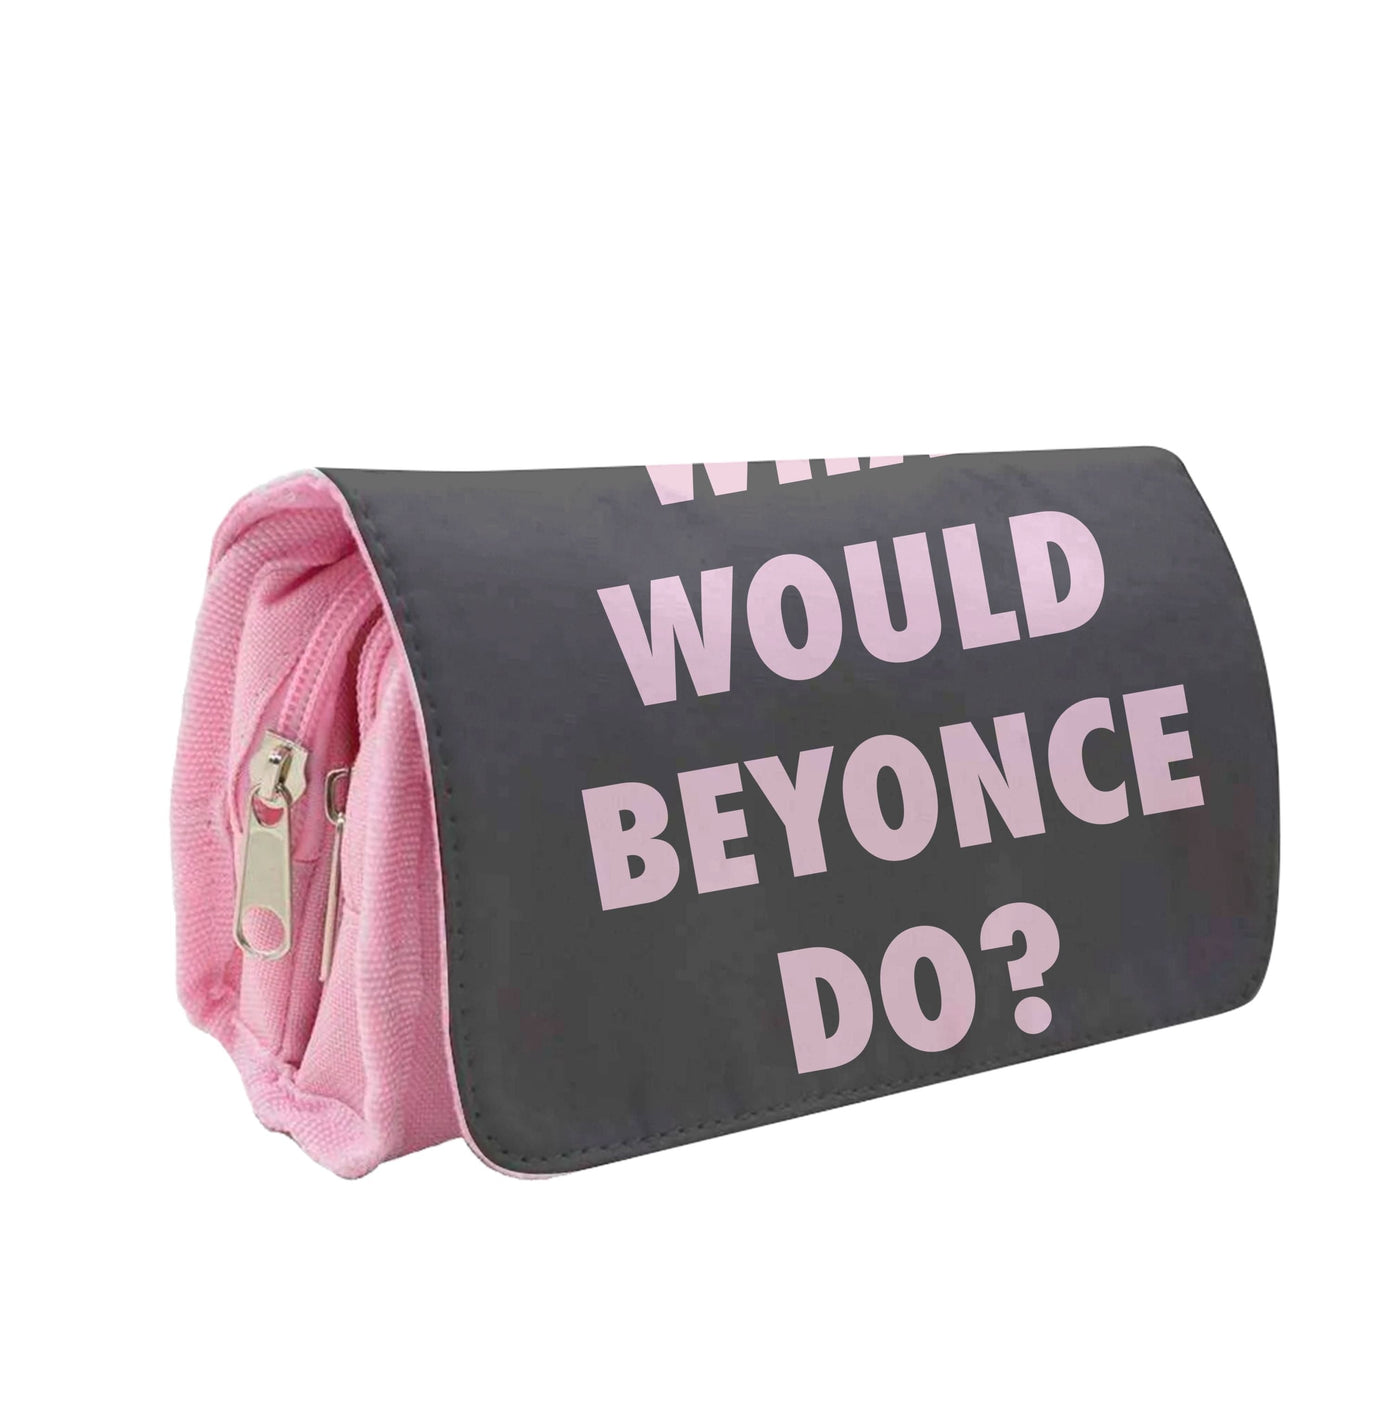 What Would Beyonce Do? Pencil Case